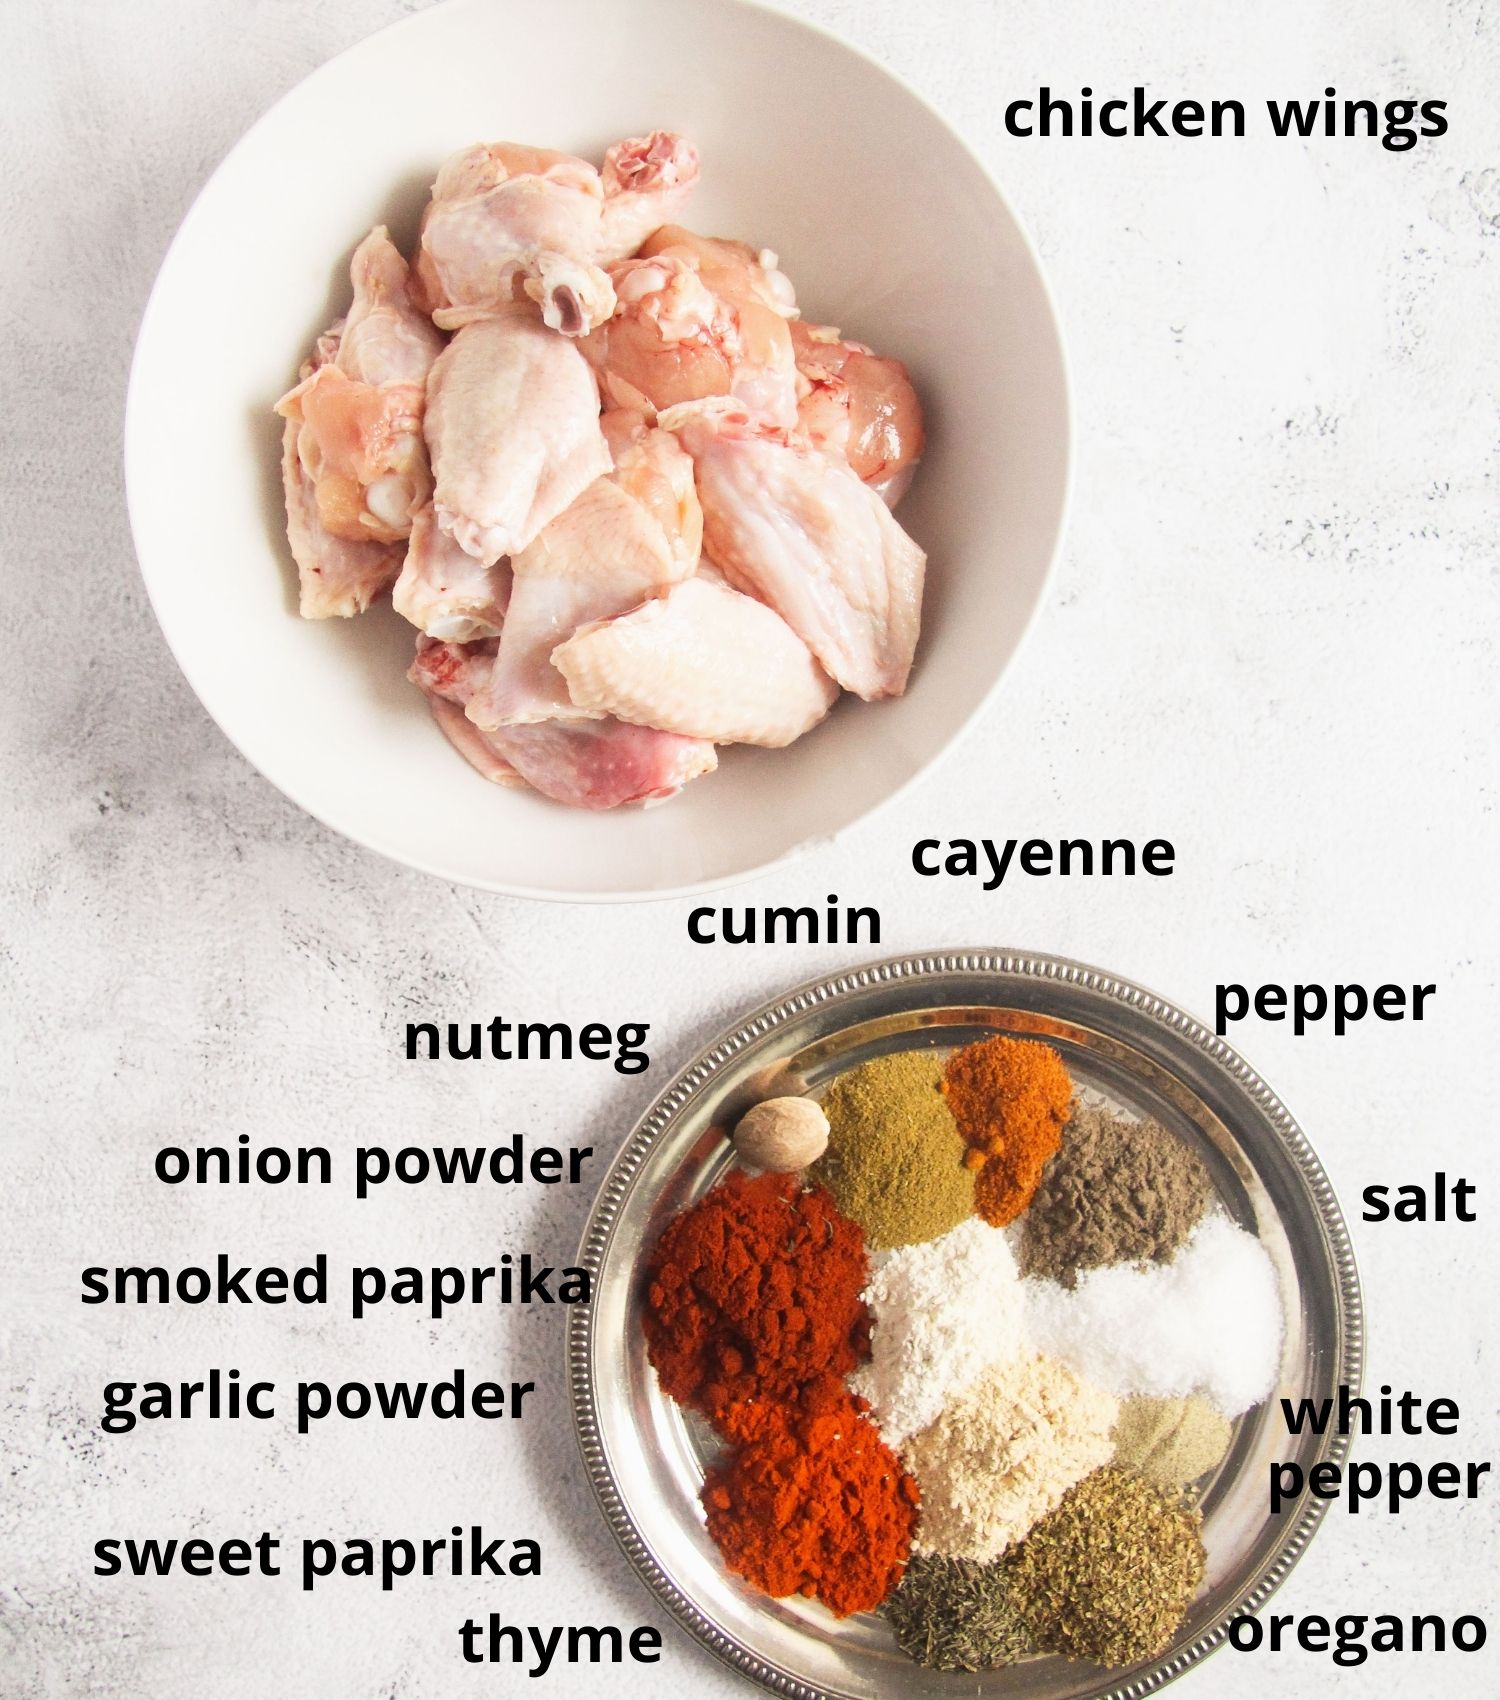 listed ingredients needed for baking cajun wings.